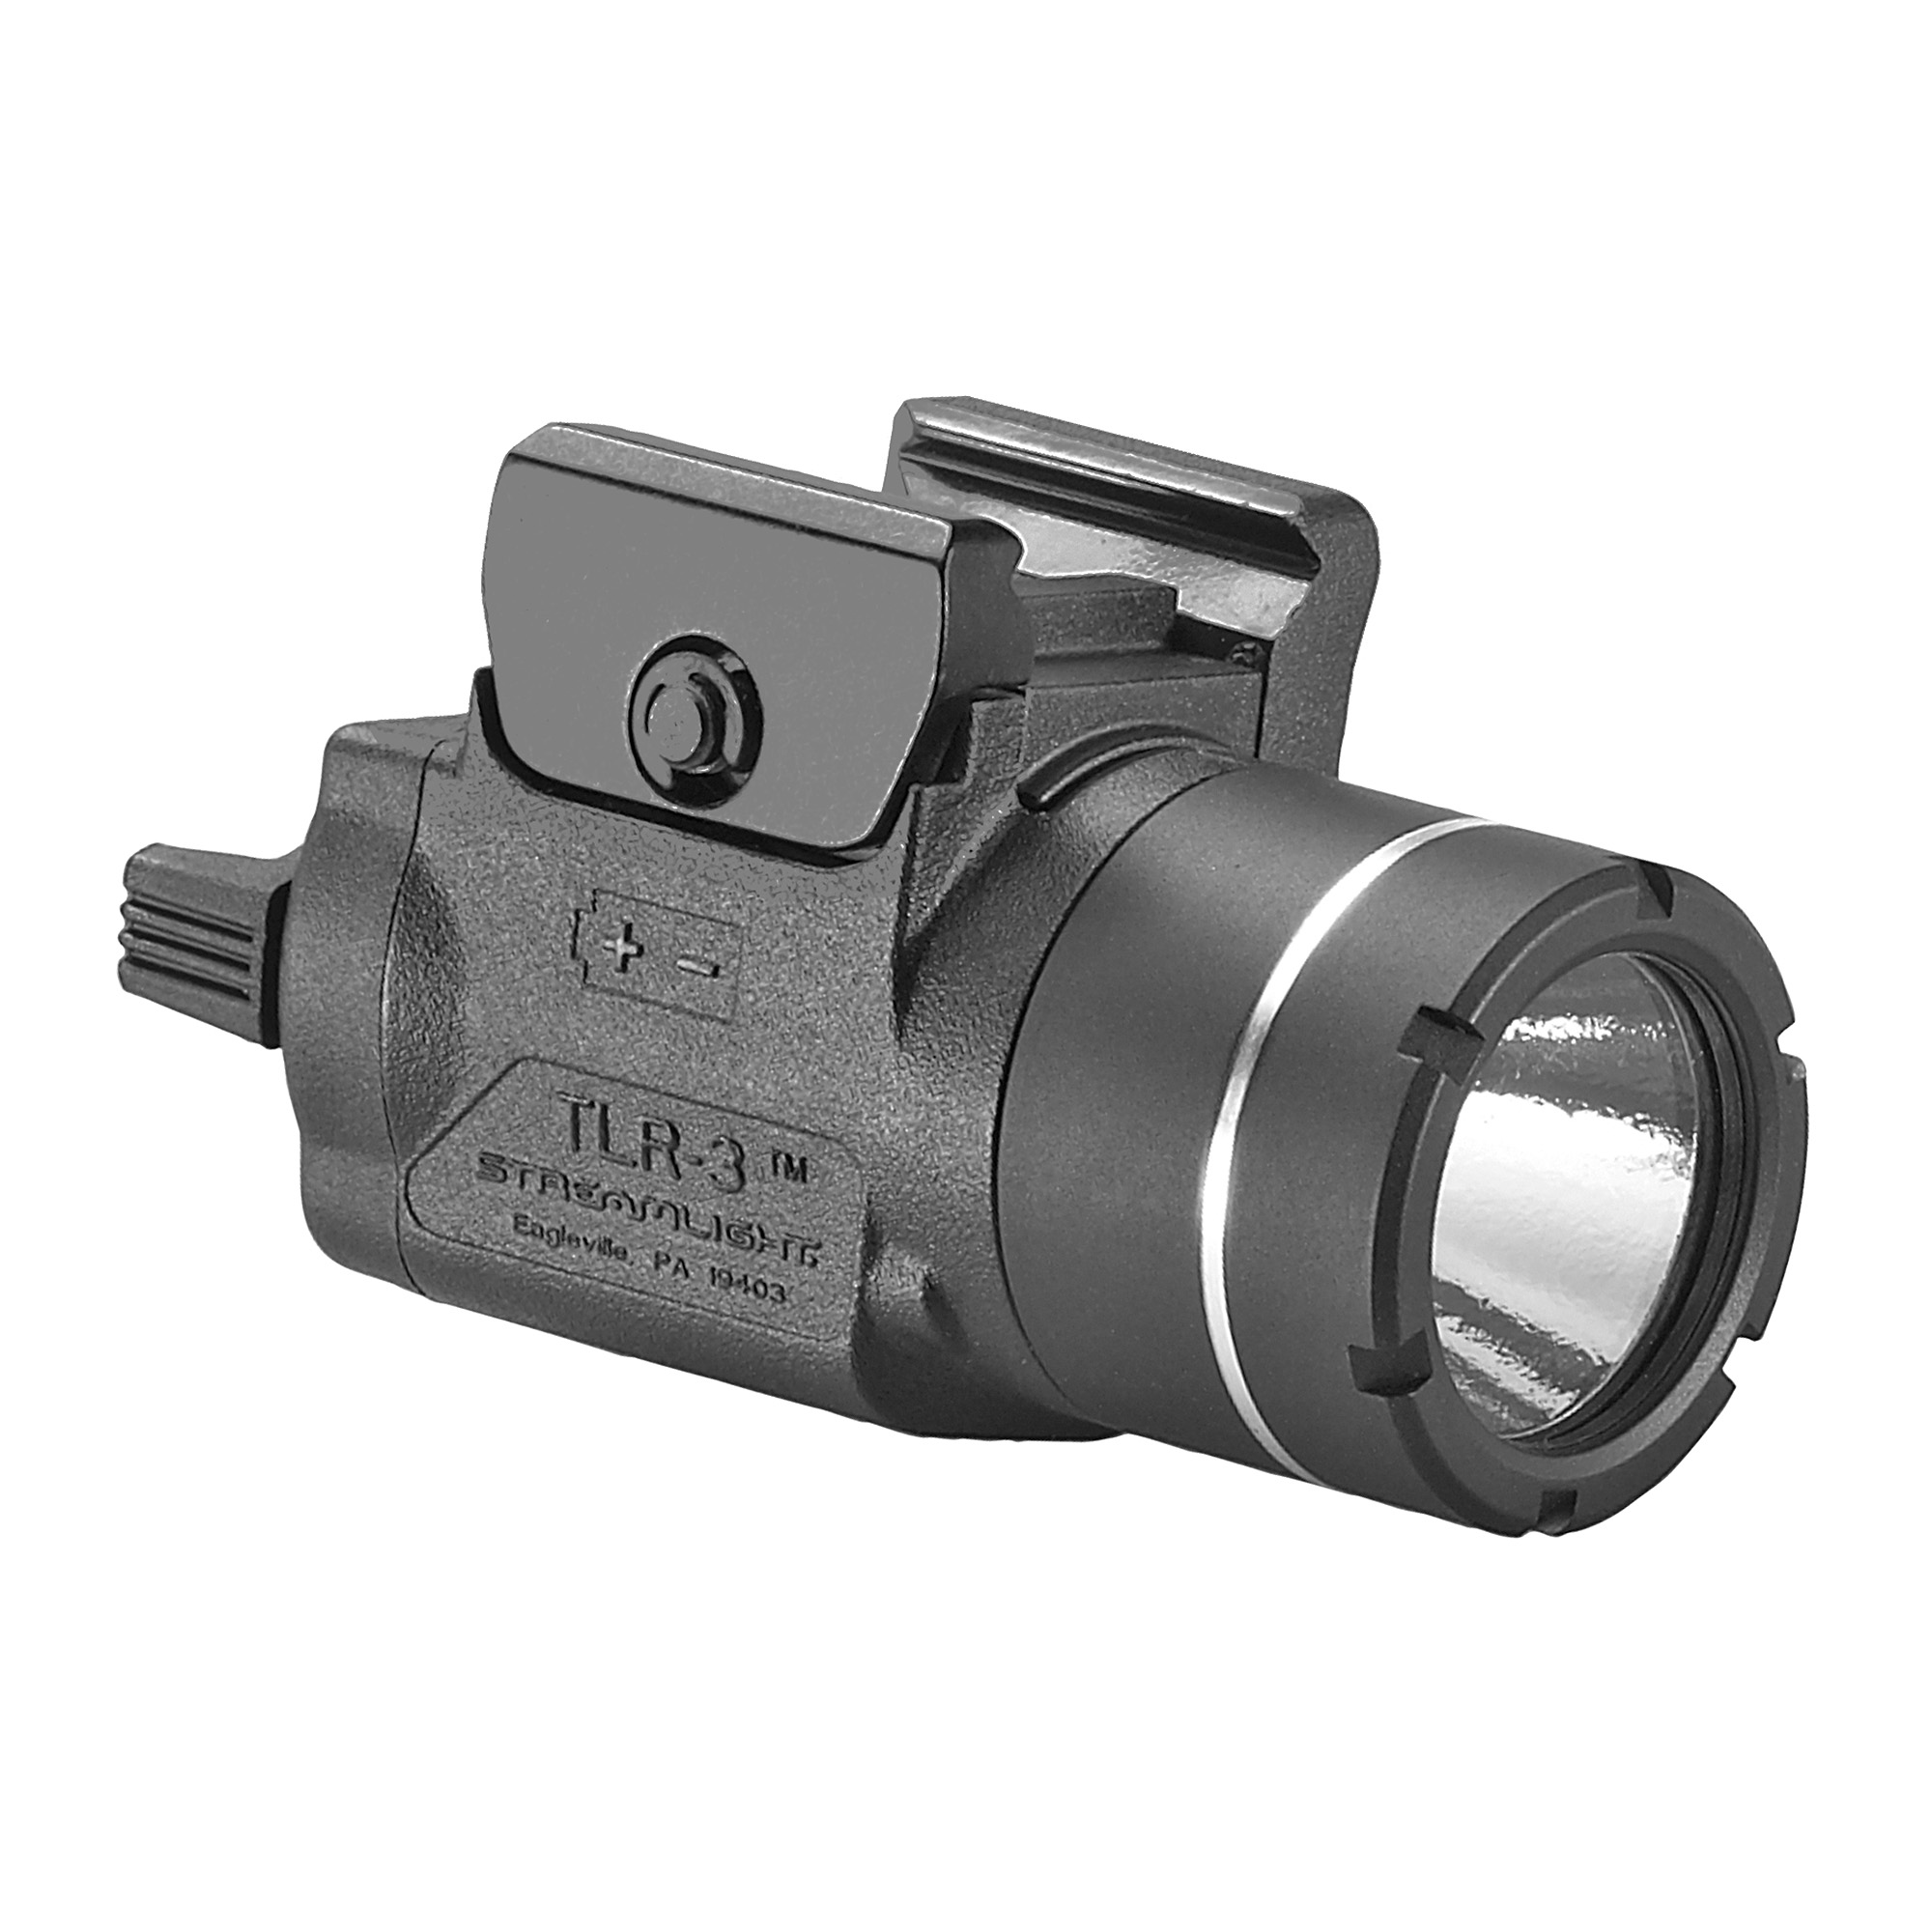 69220 for sale online Streamlight TLR-3 Compact Rail Mounted Tactical Light 